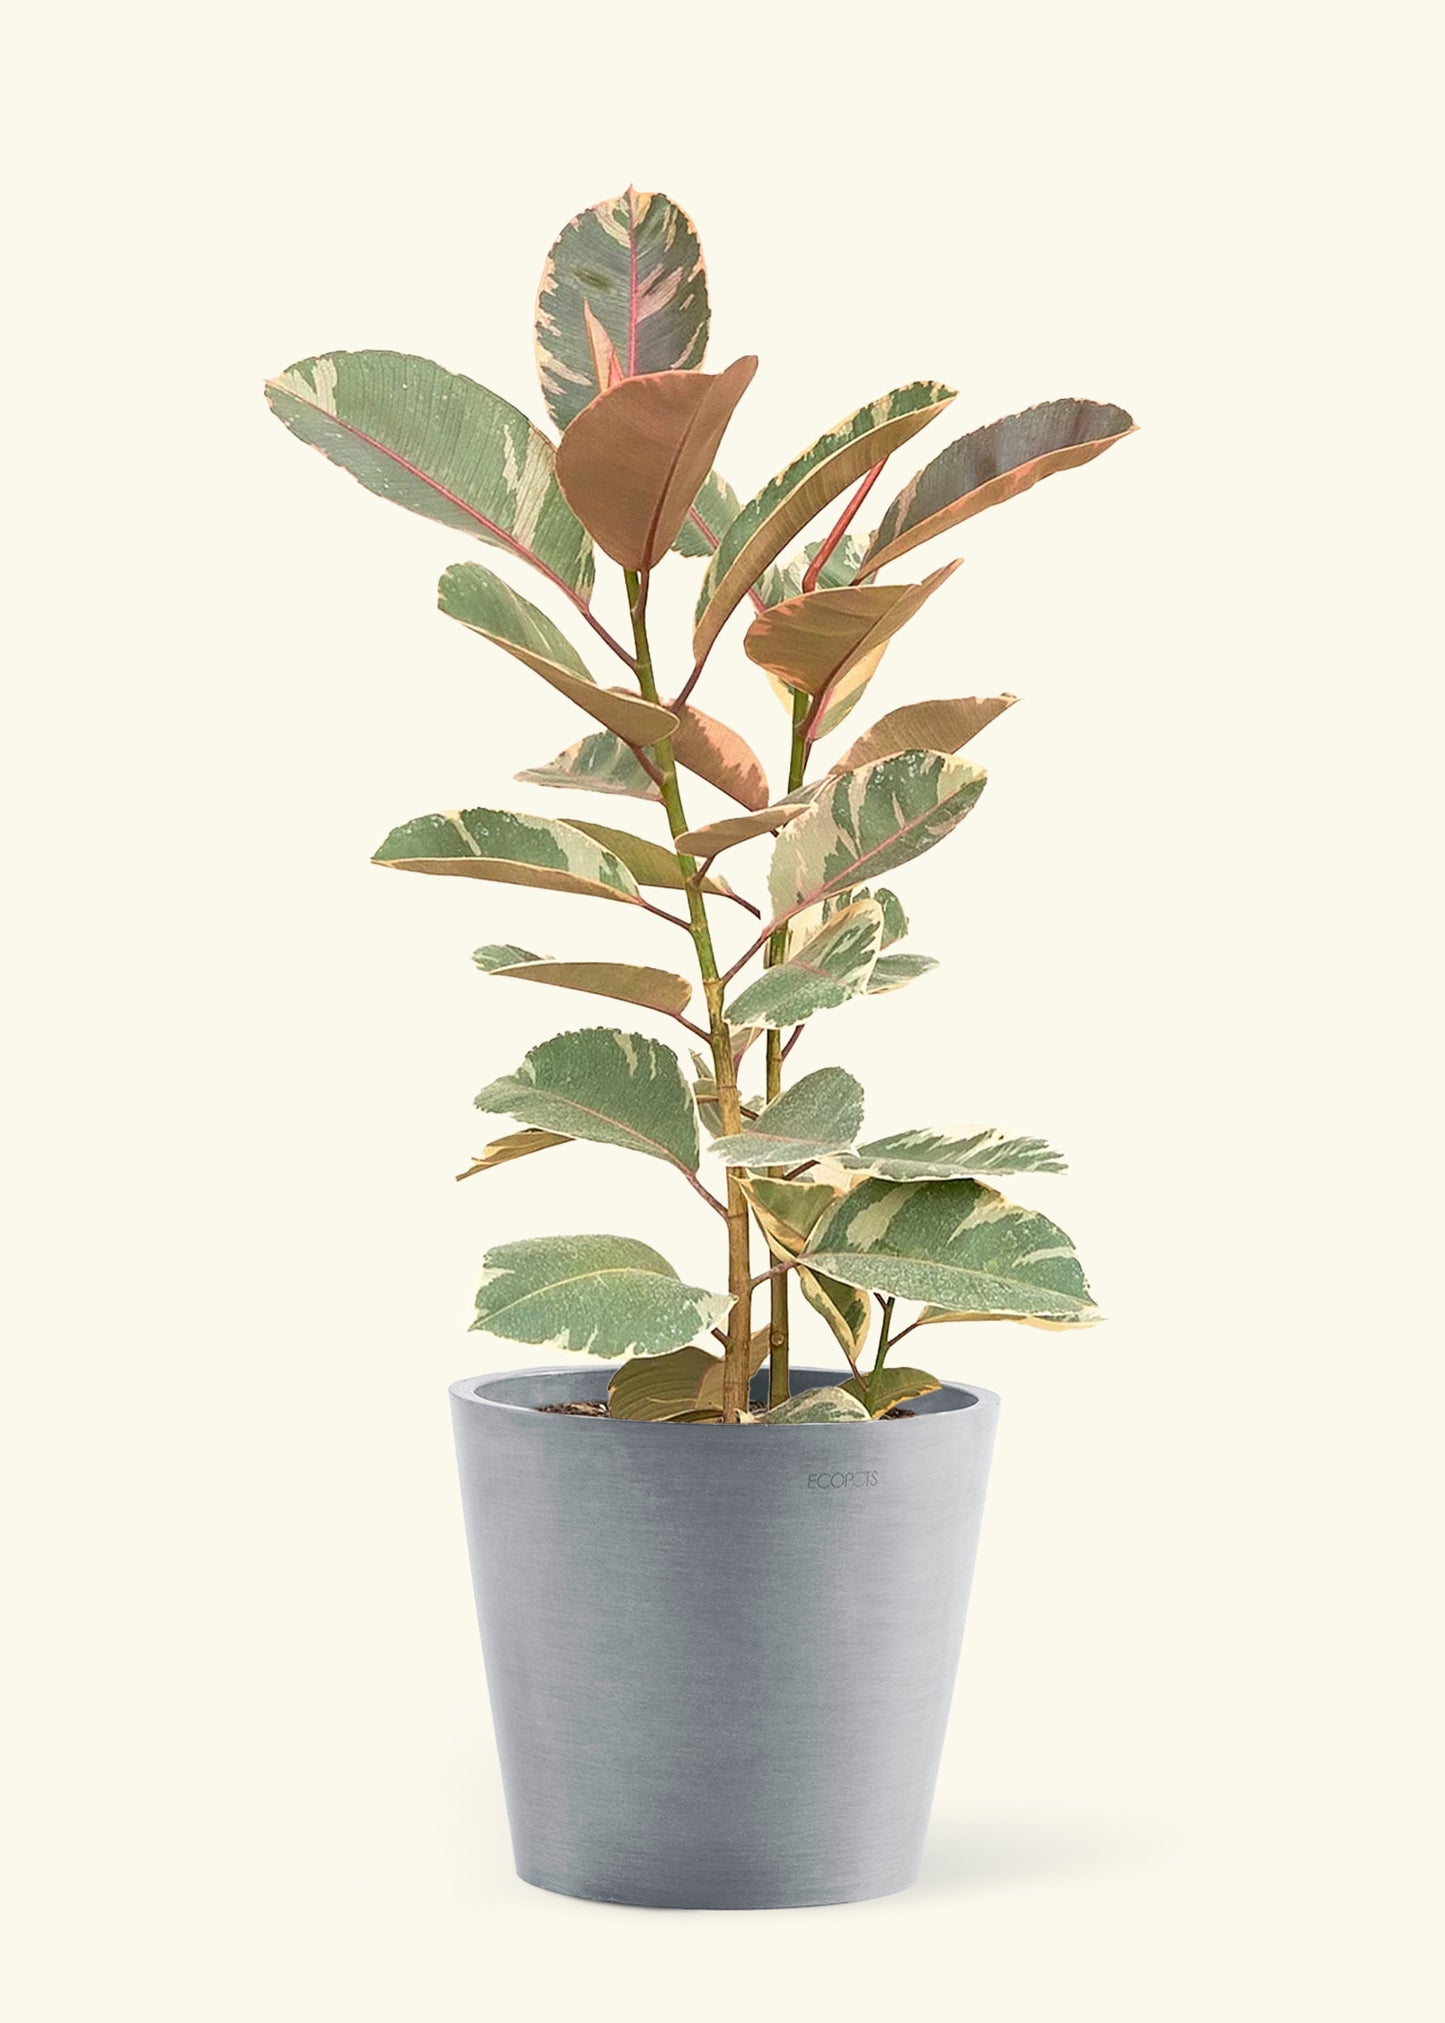 Large Ruby Rubber Tree in a gray stone pot.